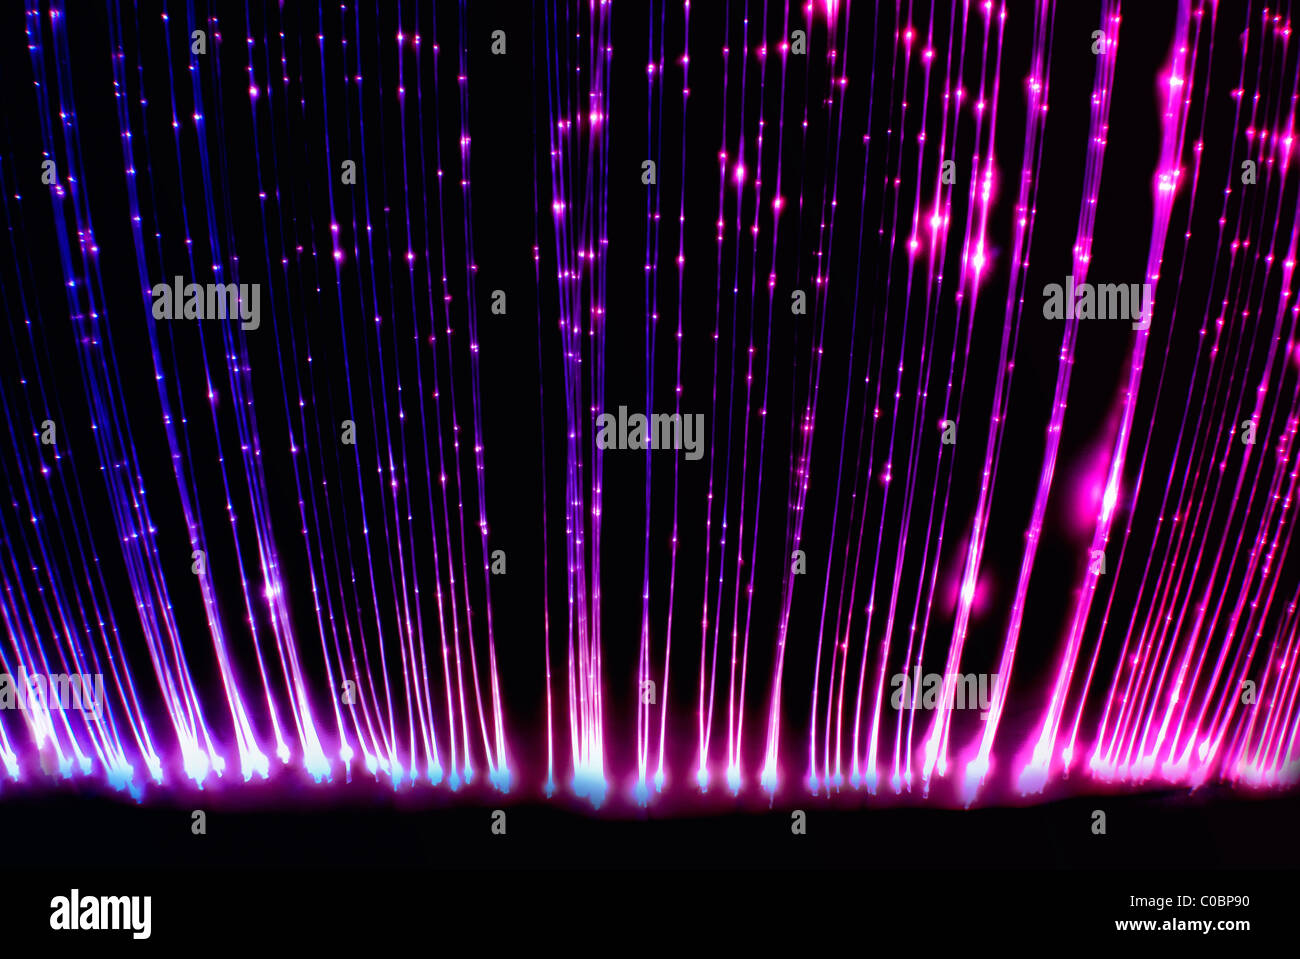 Fiber optic cables in the light sensory room. Stock Photo